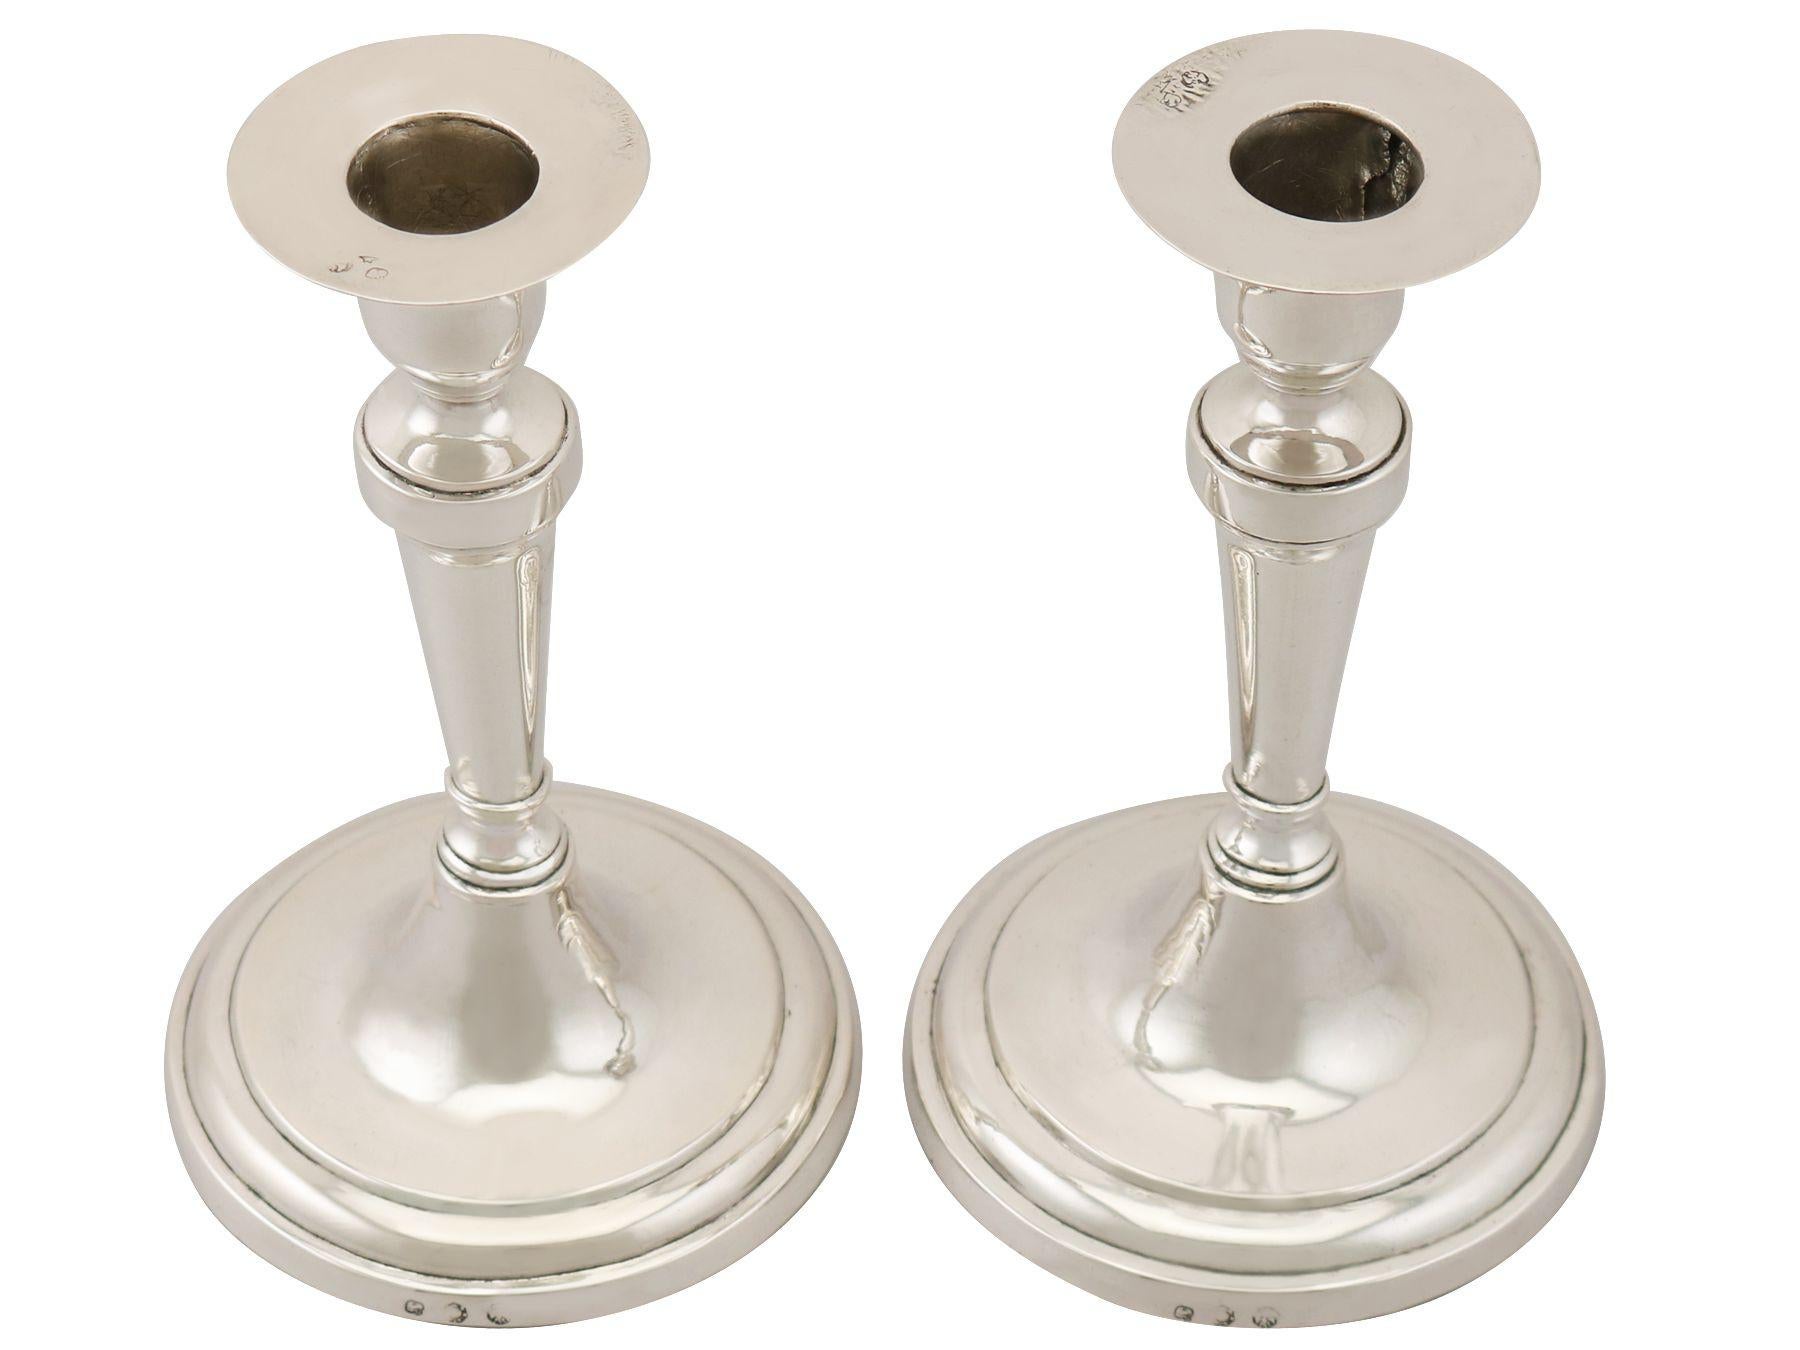 An exceptional, fine and impressive pair of antique Italian silver candlesticks; an addition to our continental silverware collection.

These exceptional antique Venetian silver candlesticks have a circular rounded form to a circular spreading